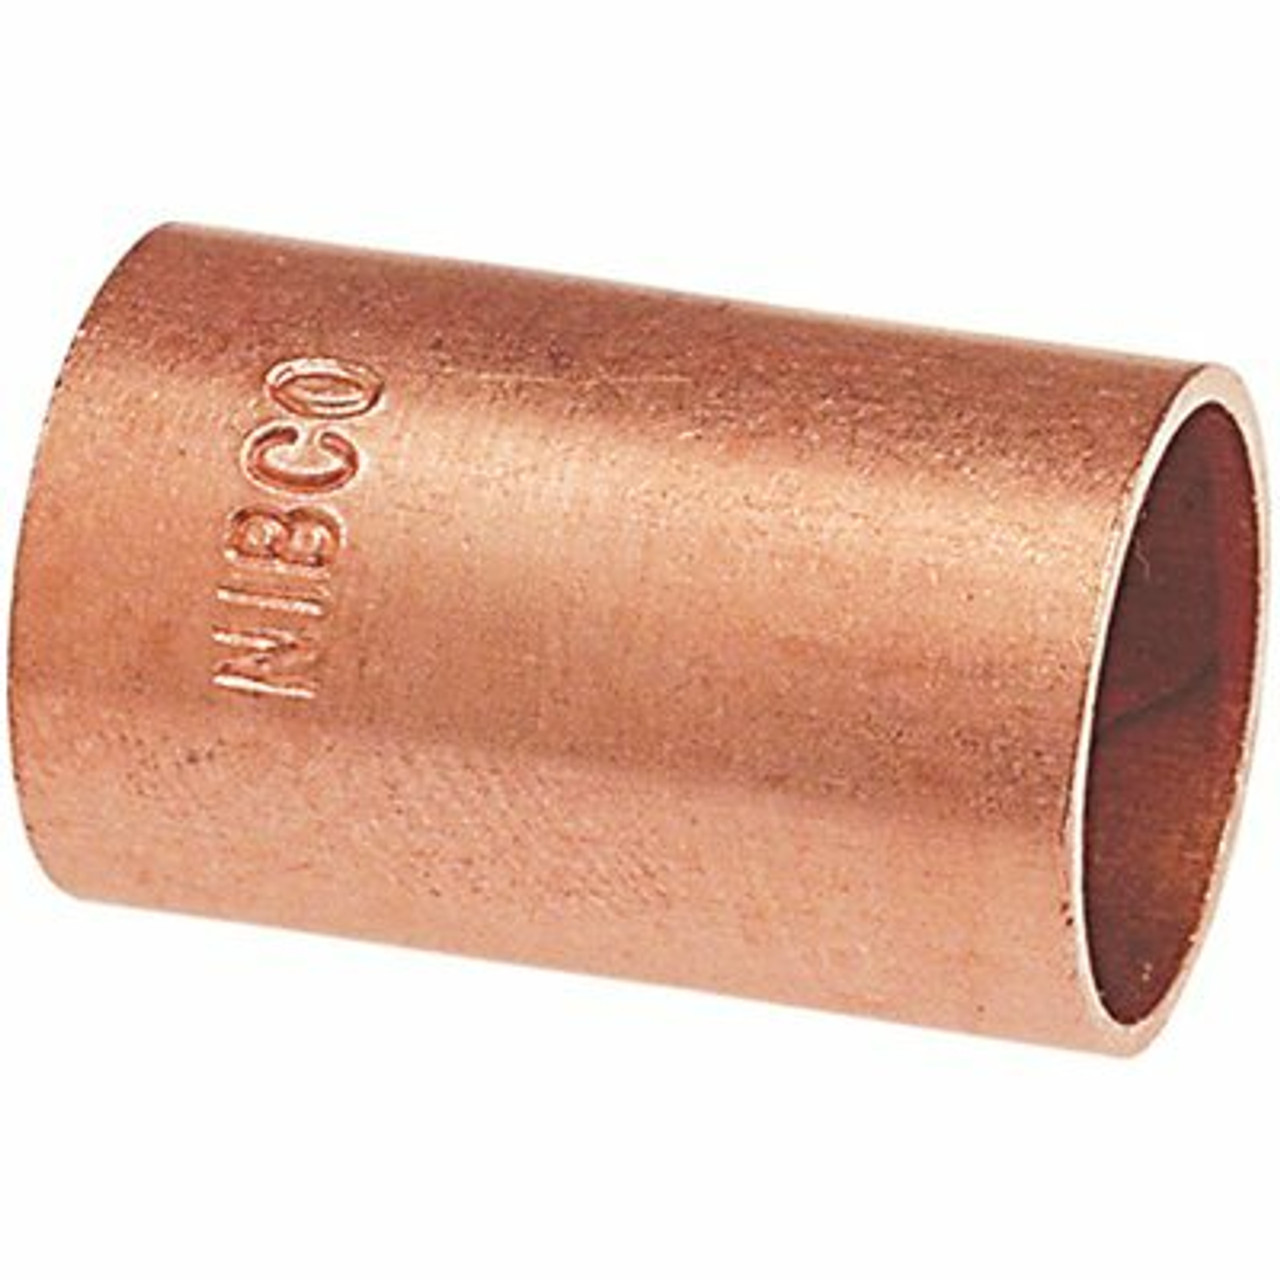 Nibco 1/2 In. Wrot Copper Cup X Cup Coupling Without Stop Fitting (50-Pack)